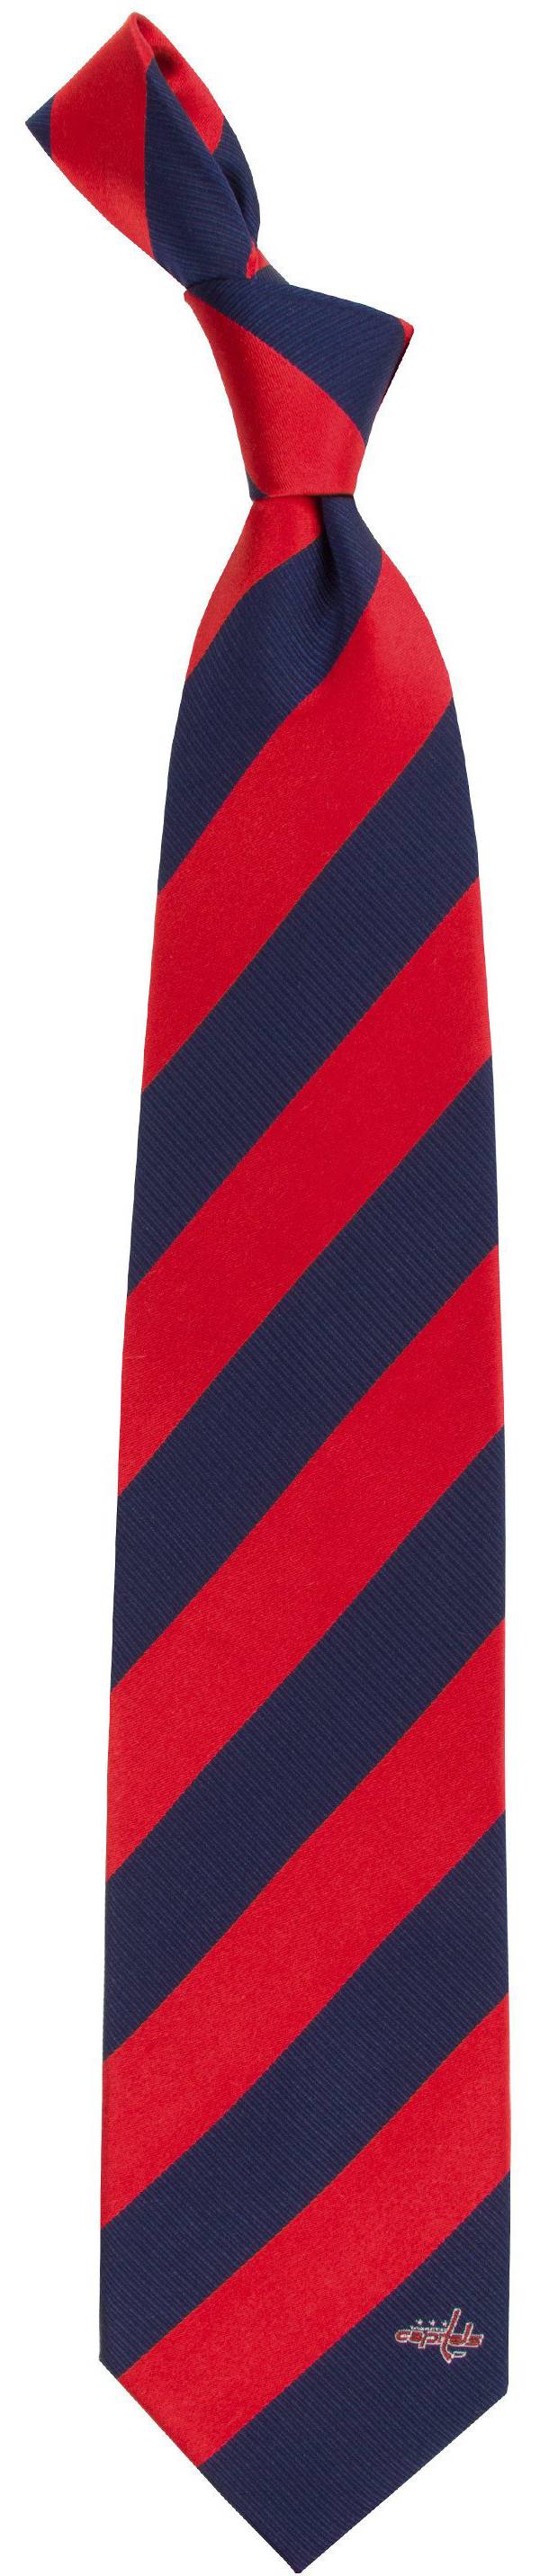 Eagles Wings Washington Capitals Woven Silk Necktie product image